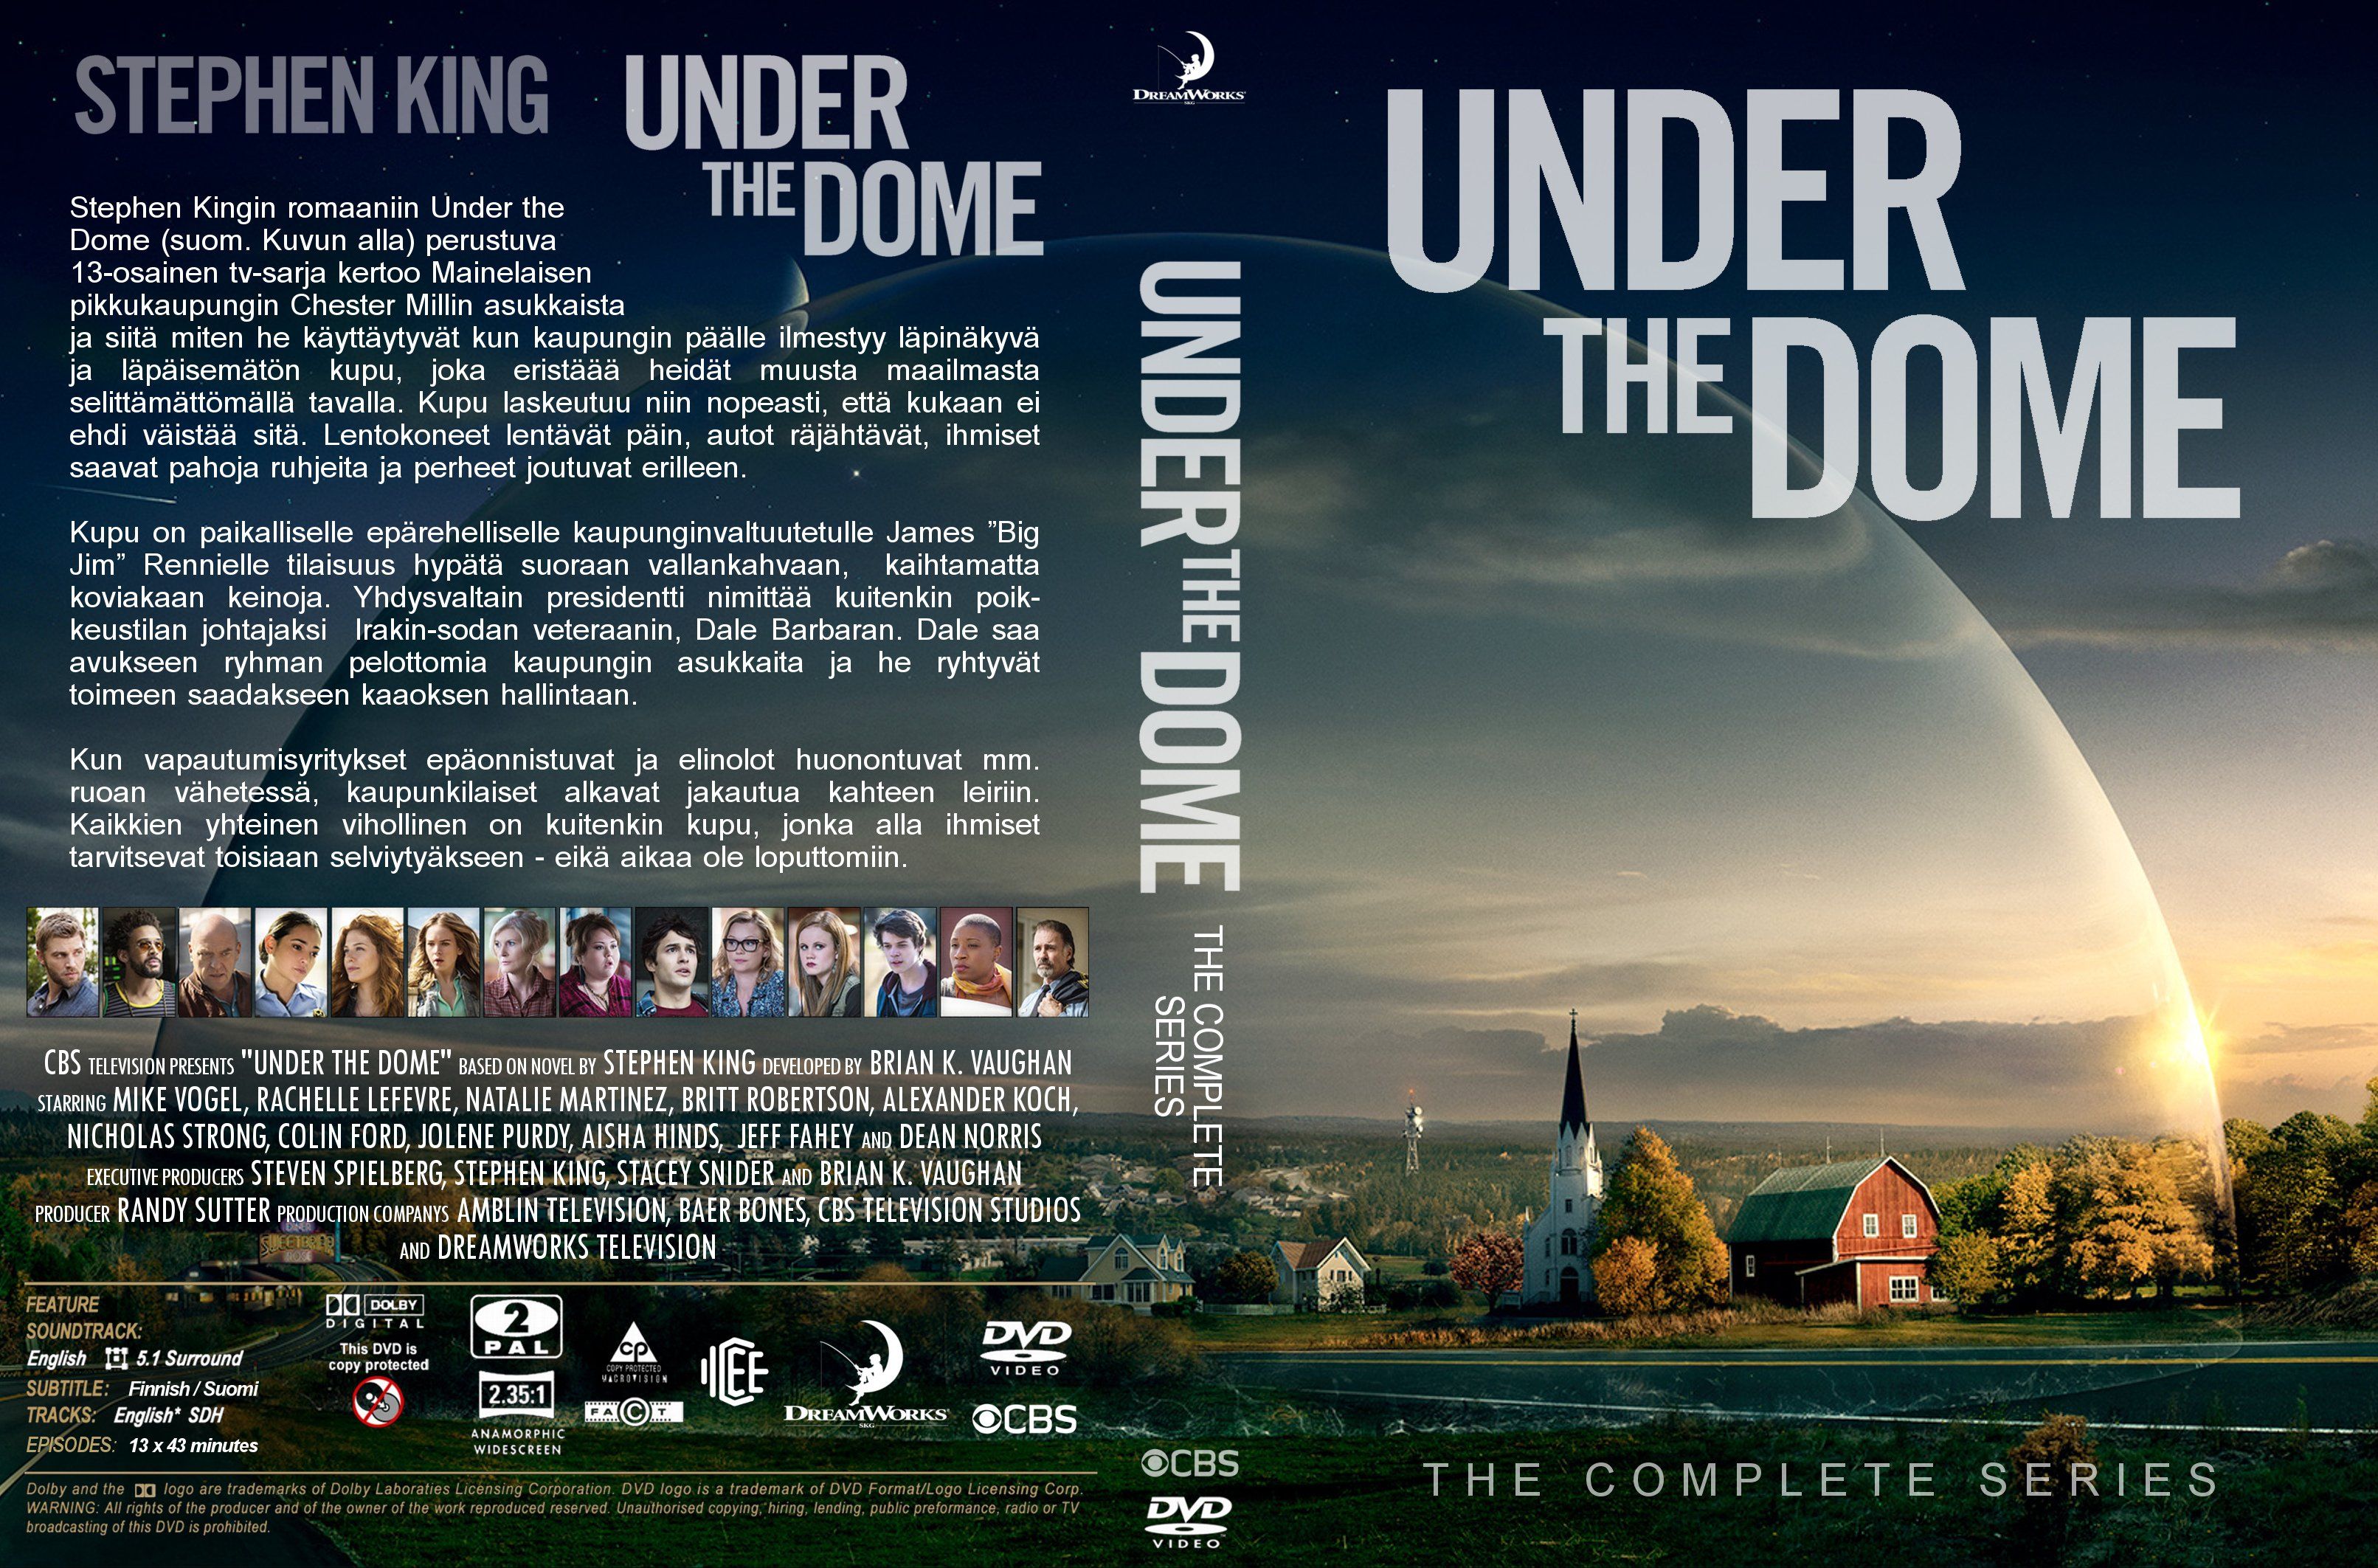 UNDER THE DOME Drama Mystery Thriller Sci Fi Series Horror 10